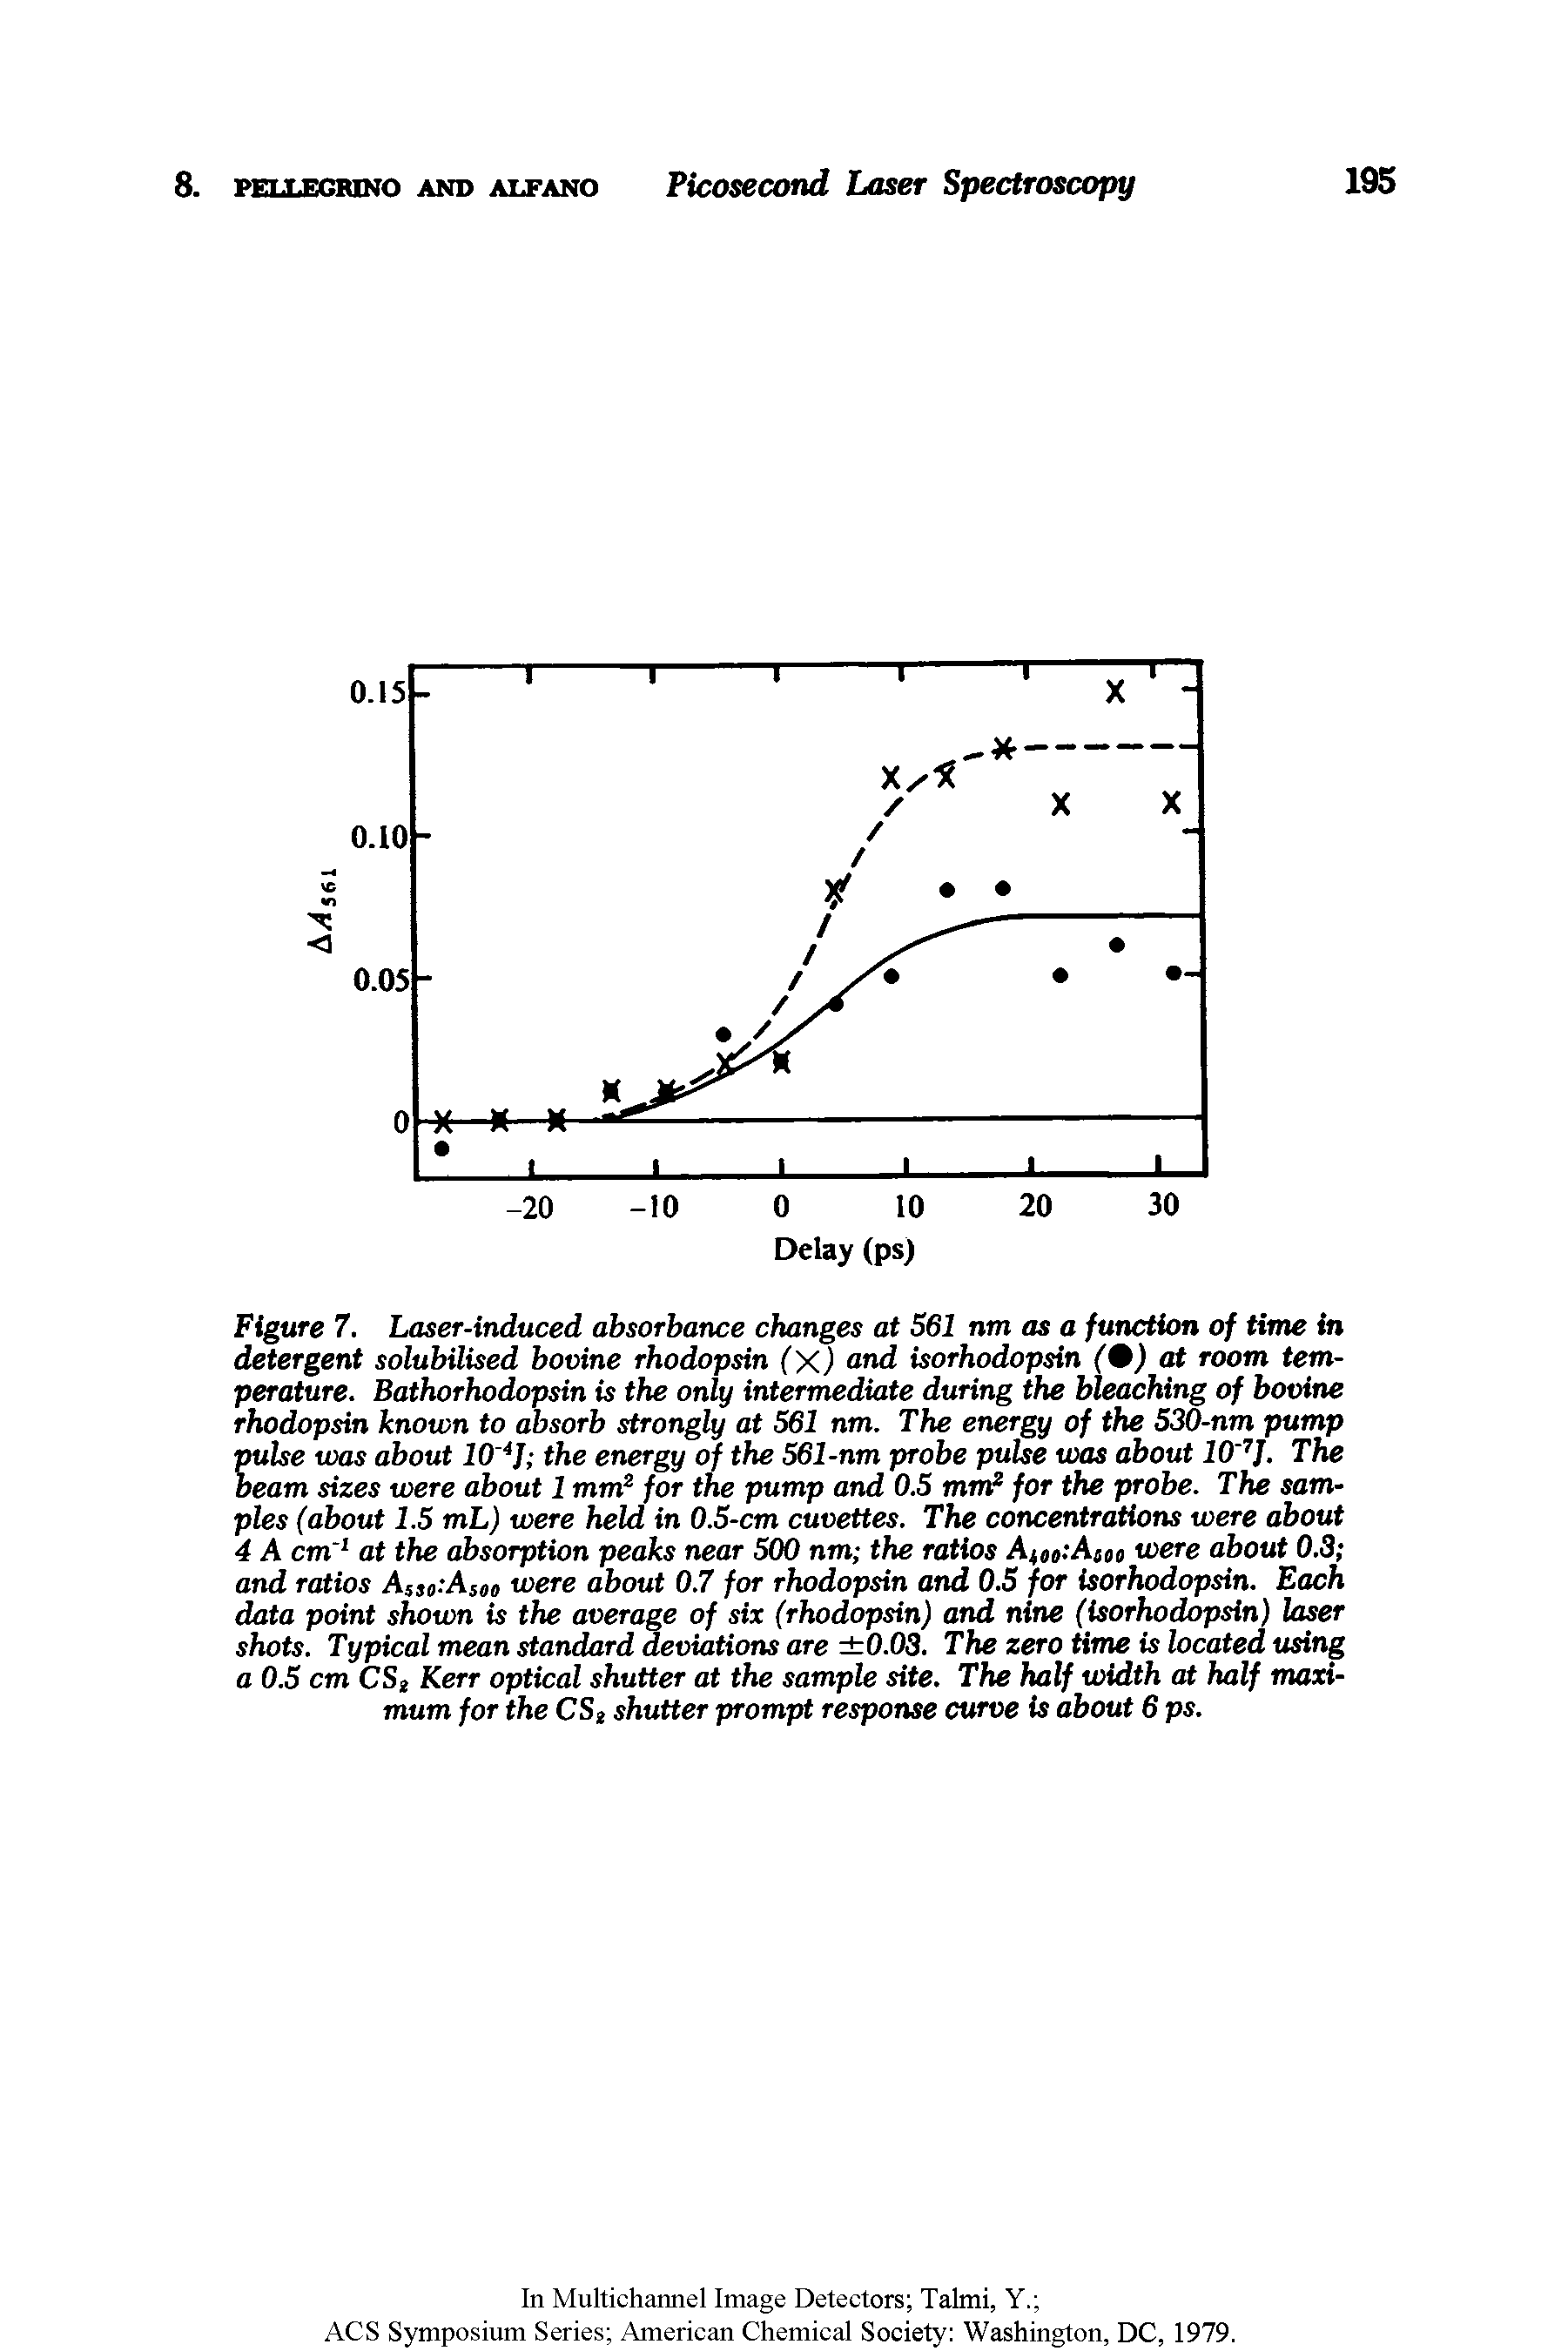 Figure 7. Laser-induced absorbance changes at 561 nm as a function of time in detergent solubilised bovine rhodopsin (X) and isorhodopsin (9) at room temperature. Bathorhodopsin is the only intermediate during the bleaching of bovine rhodopsin known to absorb strongly at 561 nm. The energy of the 530-nm pump pulse was about 10 4J the energy of the 561-nm probe pulse was about 10 7J. The beam sizes were about 1 mm2 for the pump and 0.5 mm2 for the probe. The samples (about 1.5 mL) were held in 0.5-cm cuvettes. The concentrations were about 4 A cm I at the absorption peaks near 500 nm the ratios A Ajjj were about 0.3 and ratios ASsa. As<)o were about 0.7 for rhodopsin and 0.5 for isorhodopsin. Each data point shown is the average of six (rhodopsin) and nine (isorhodopsin) laser shots. Typical mean standard deviations are 0.03. The zero time is located using a 0.5 cm CS2 Kerr optical shutter at the sample site. The half width at half maximum for the CS2 shutter prompt response curve is about 6 ps.